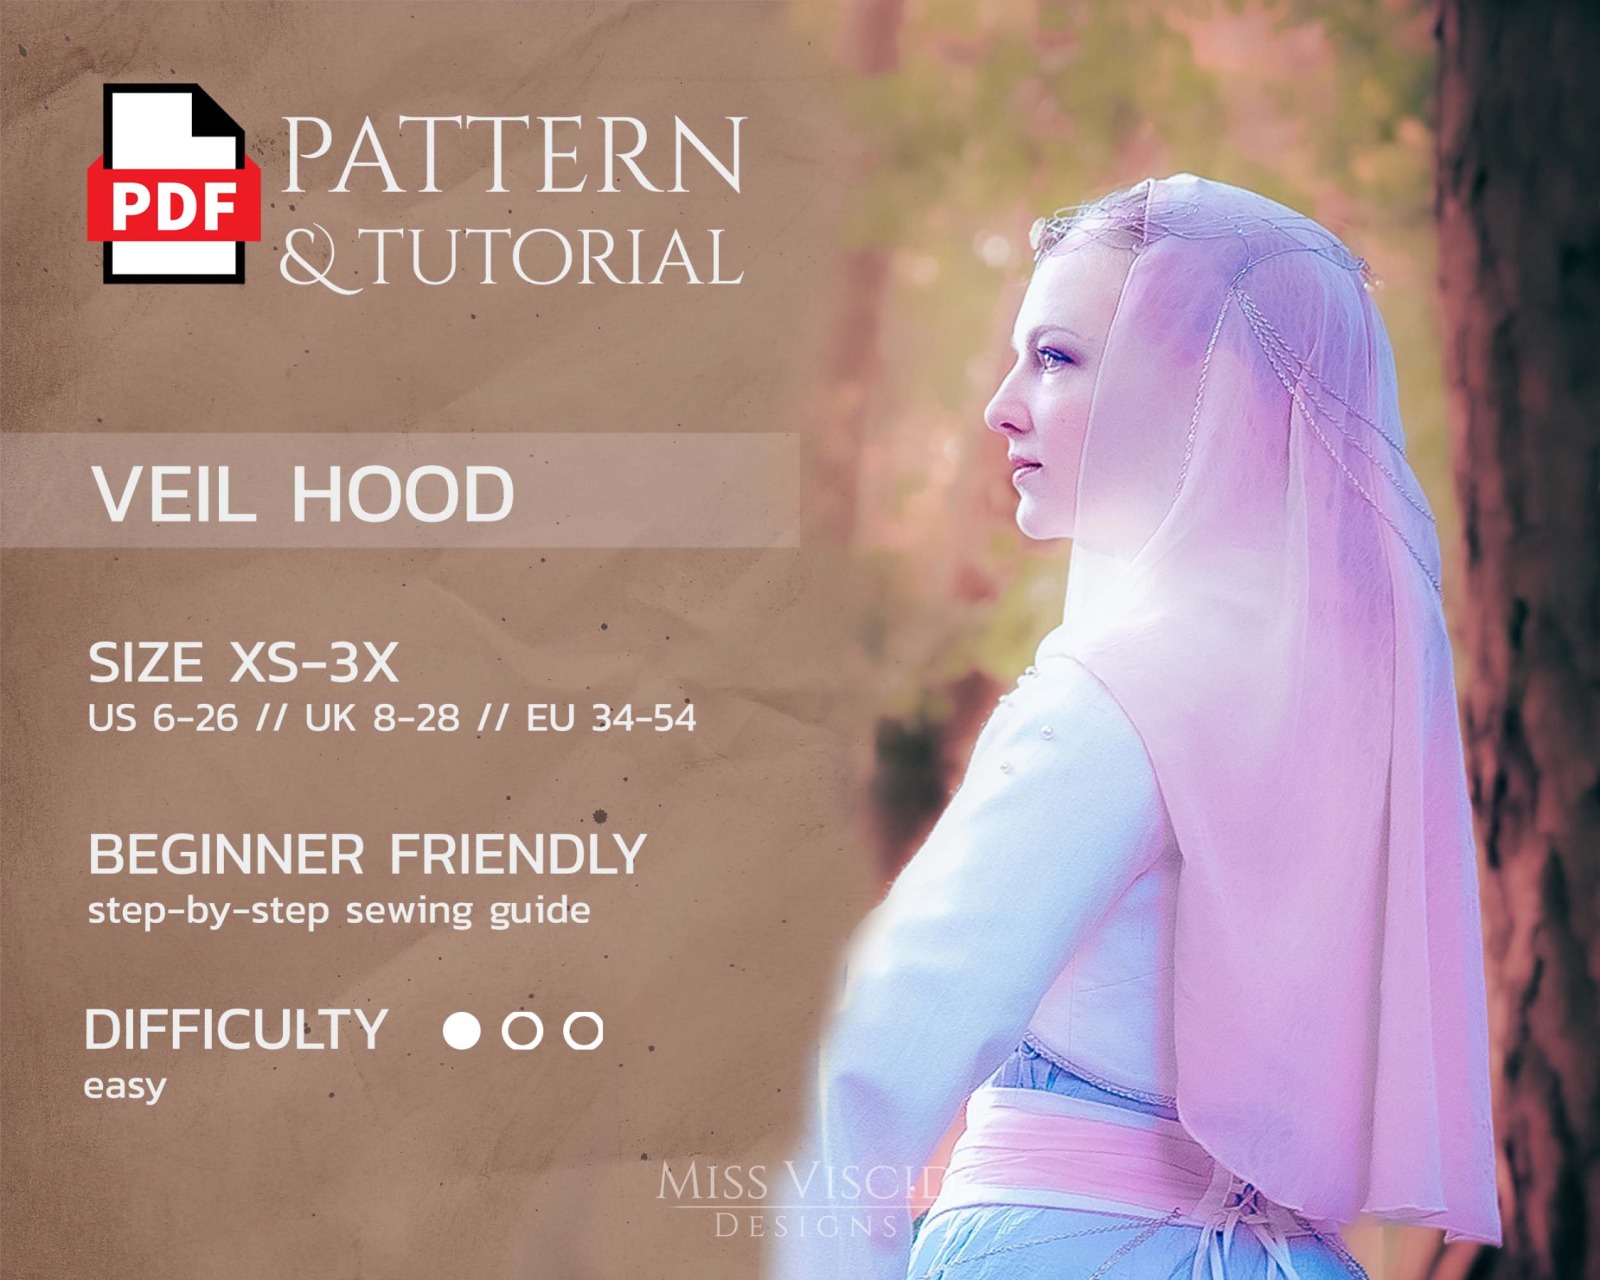 Bridal Veil Hood for wedding gowns - download pattern with sewing guide